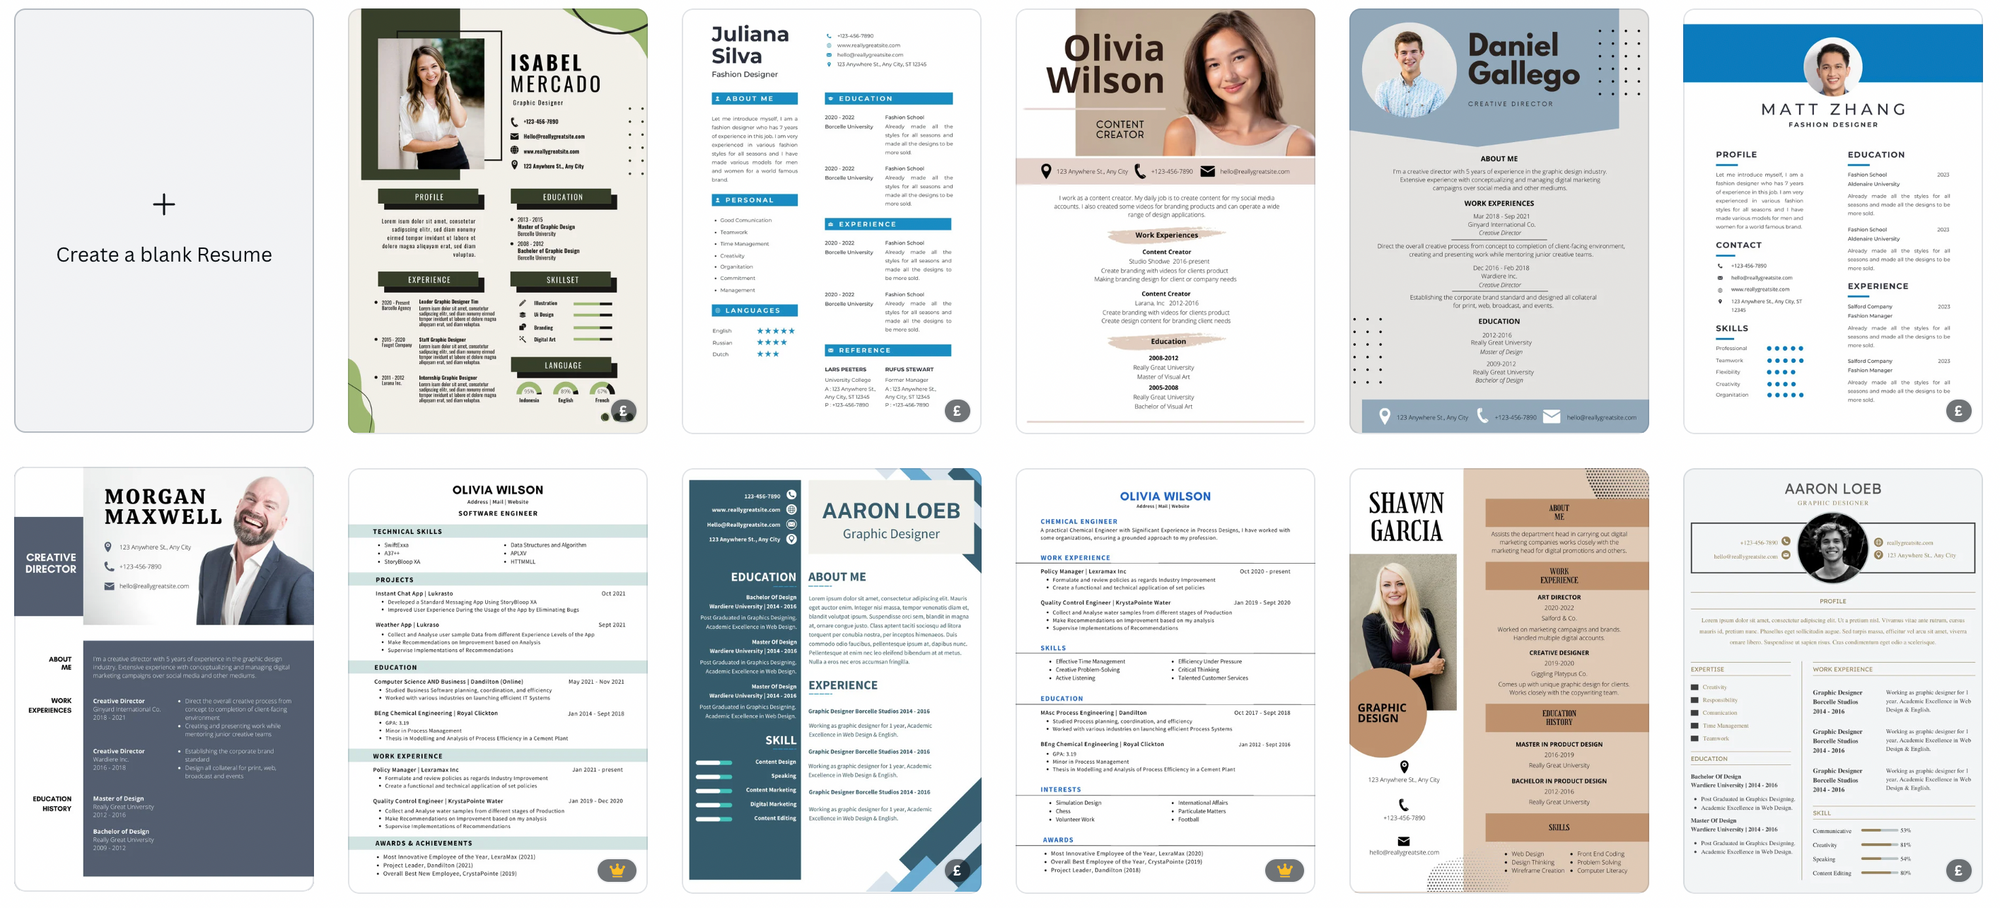 How to Find Inspiration for Your CV or Resumé: Handy Resources